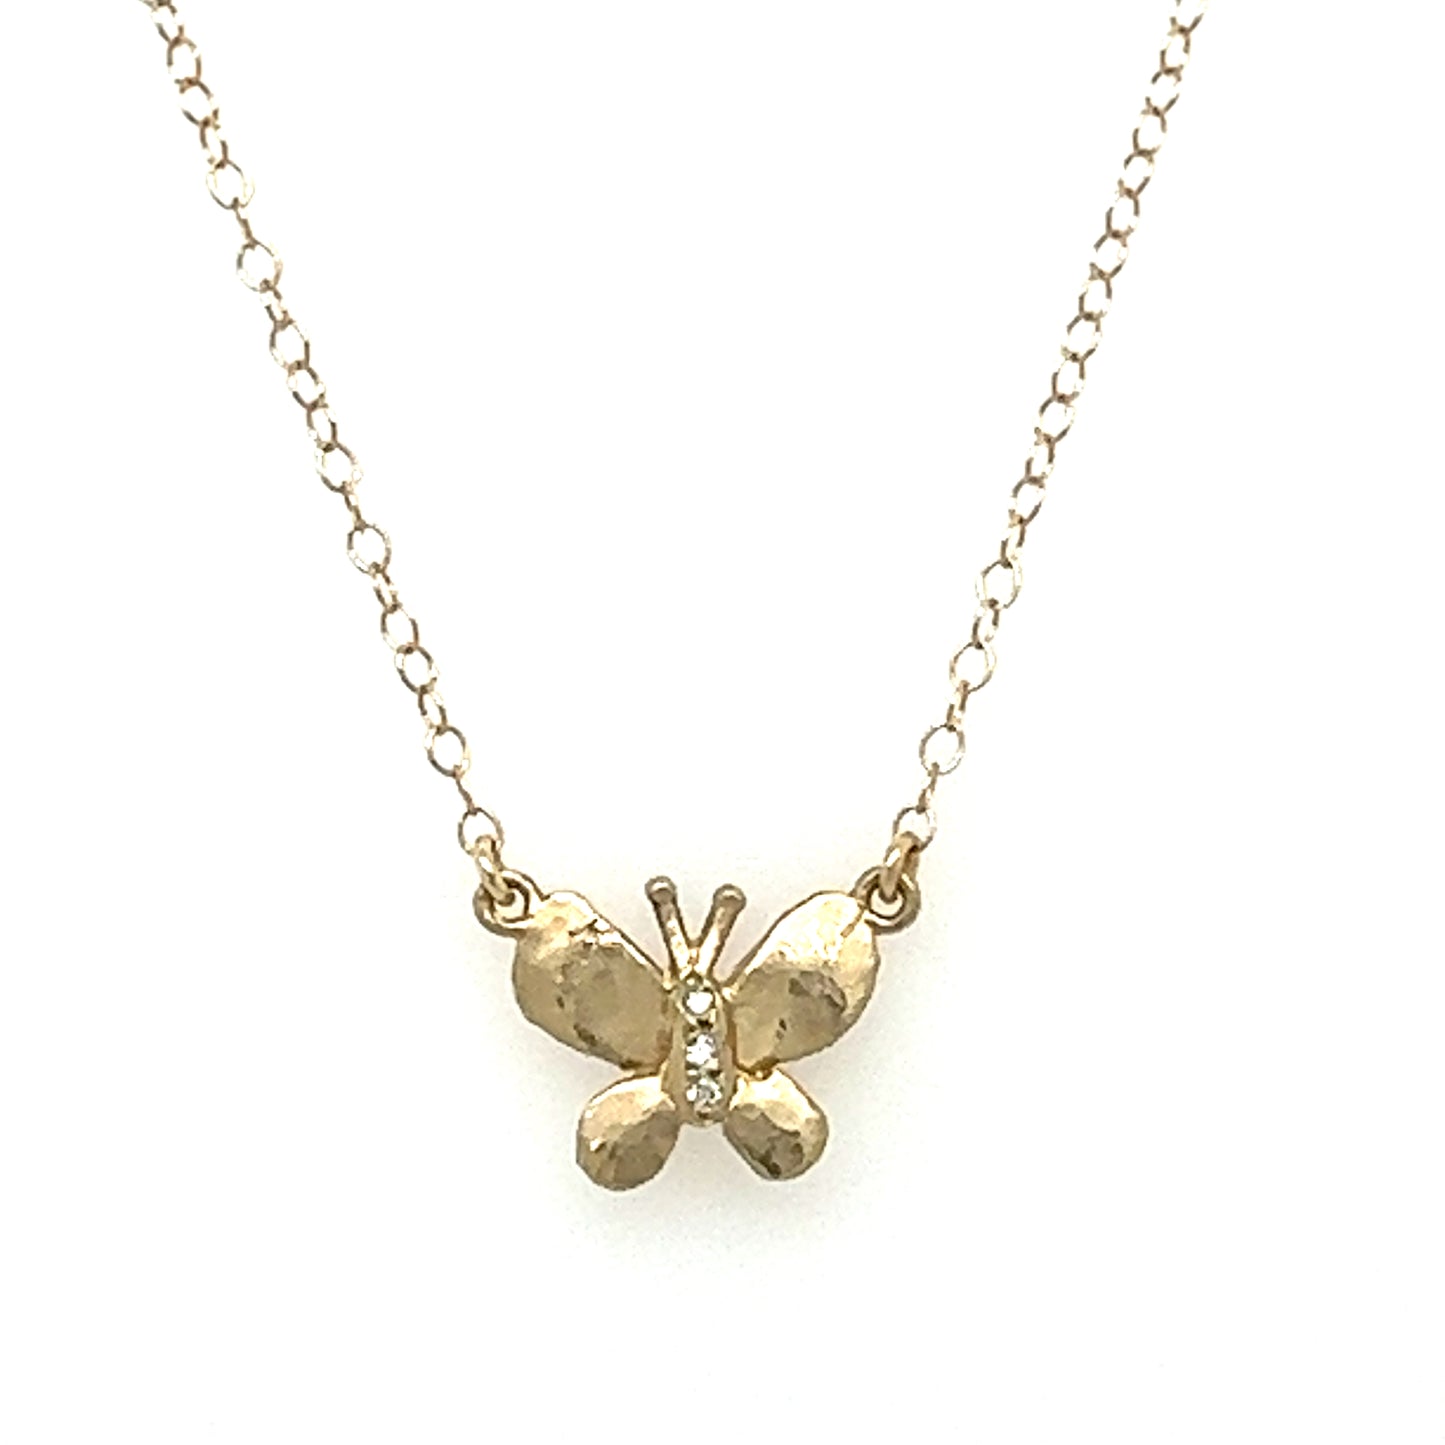 Victoria Cunningham 14kt Gold and Diamond Butterfly Necklace